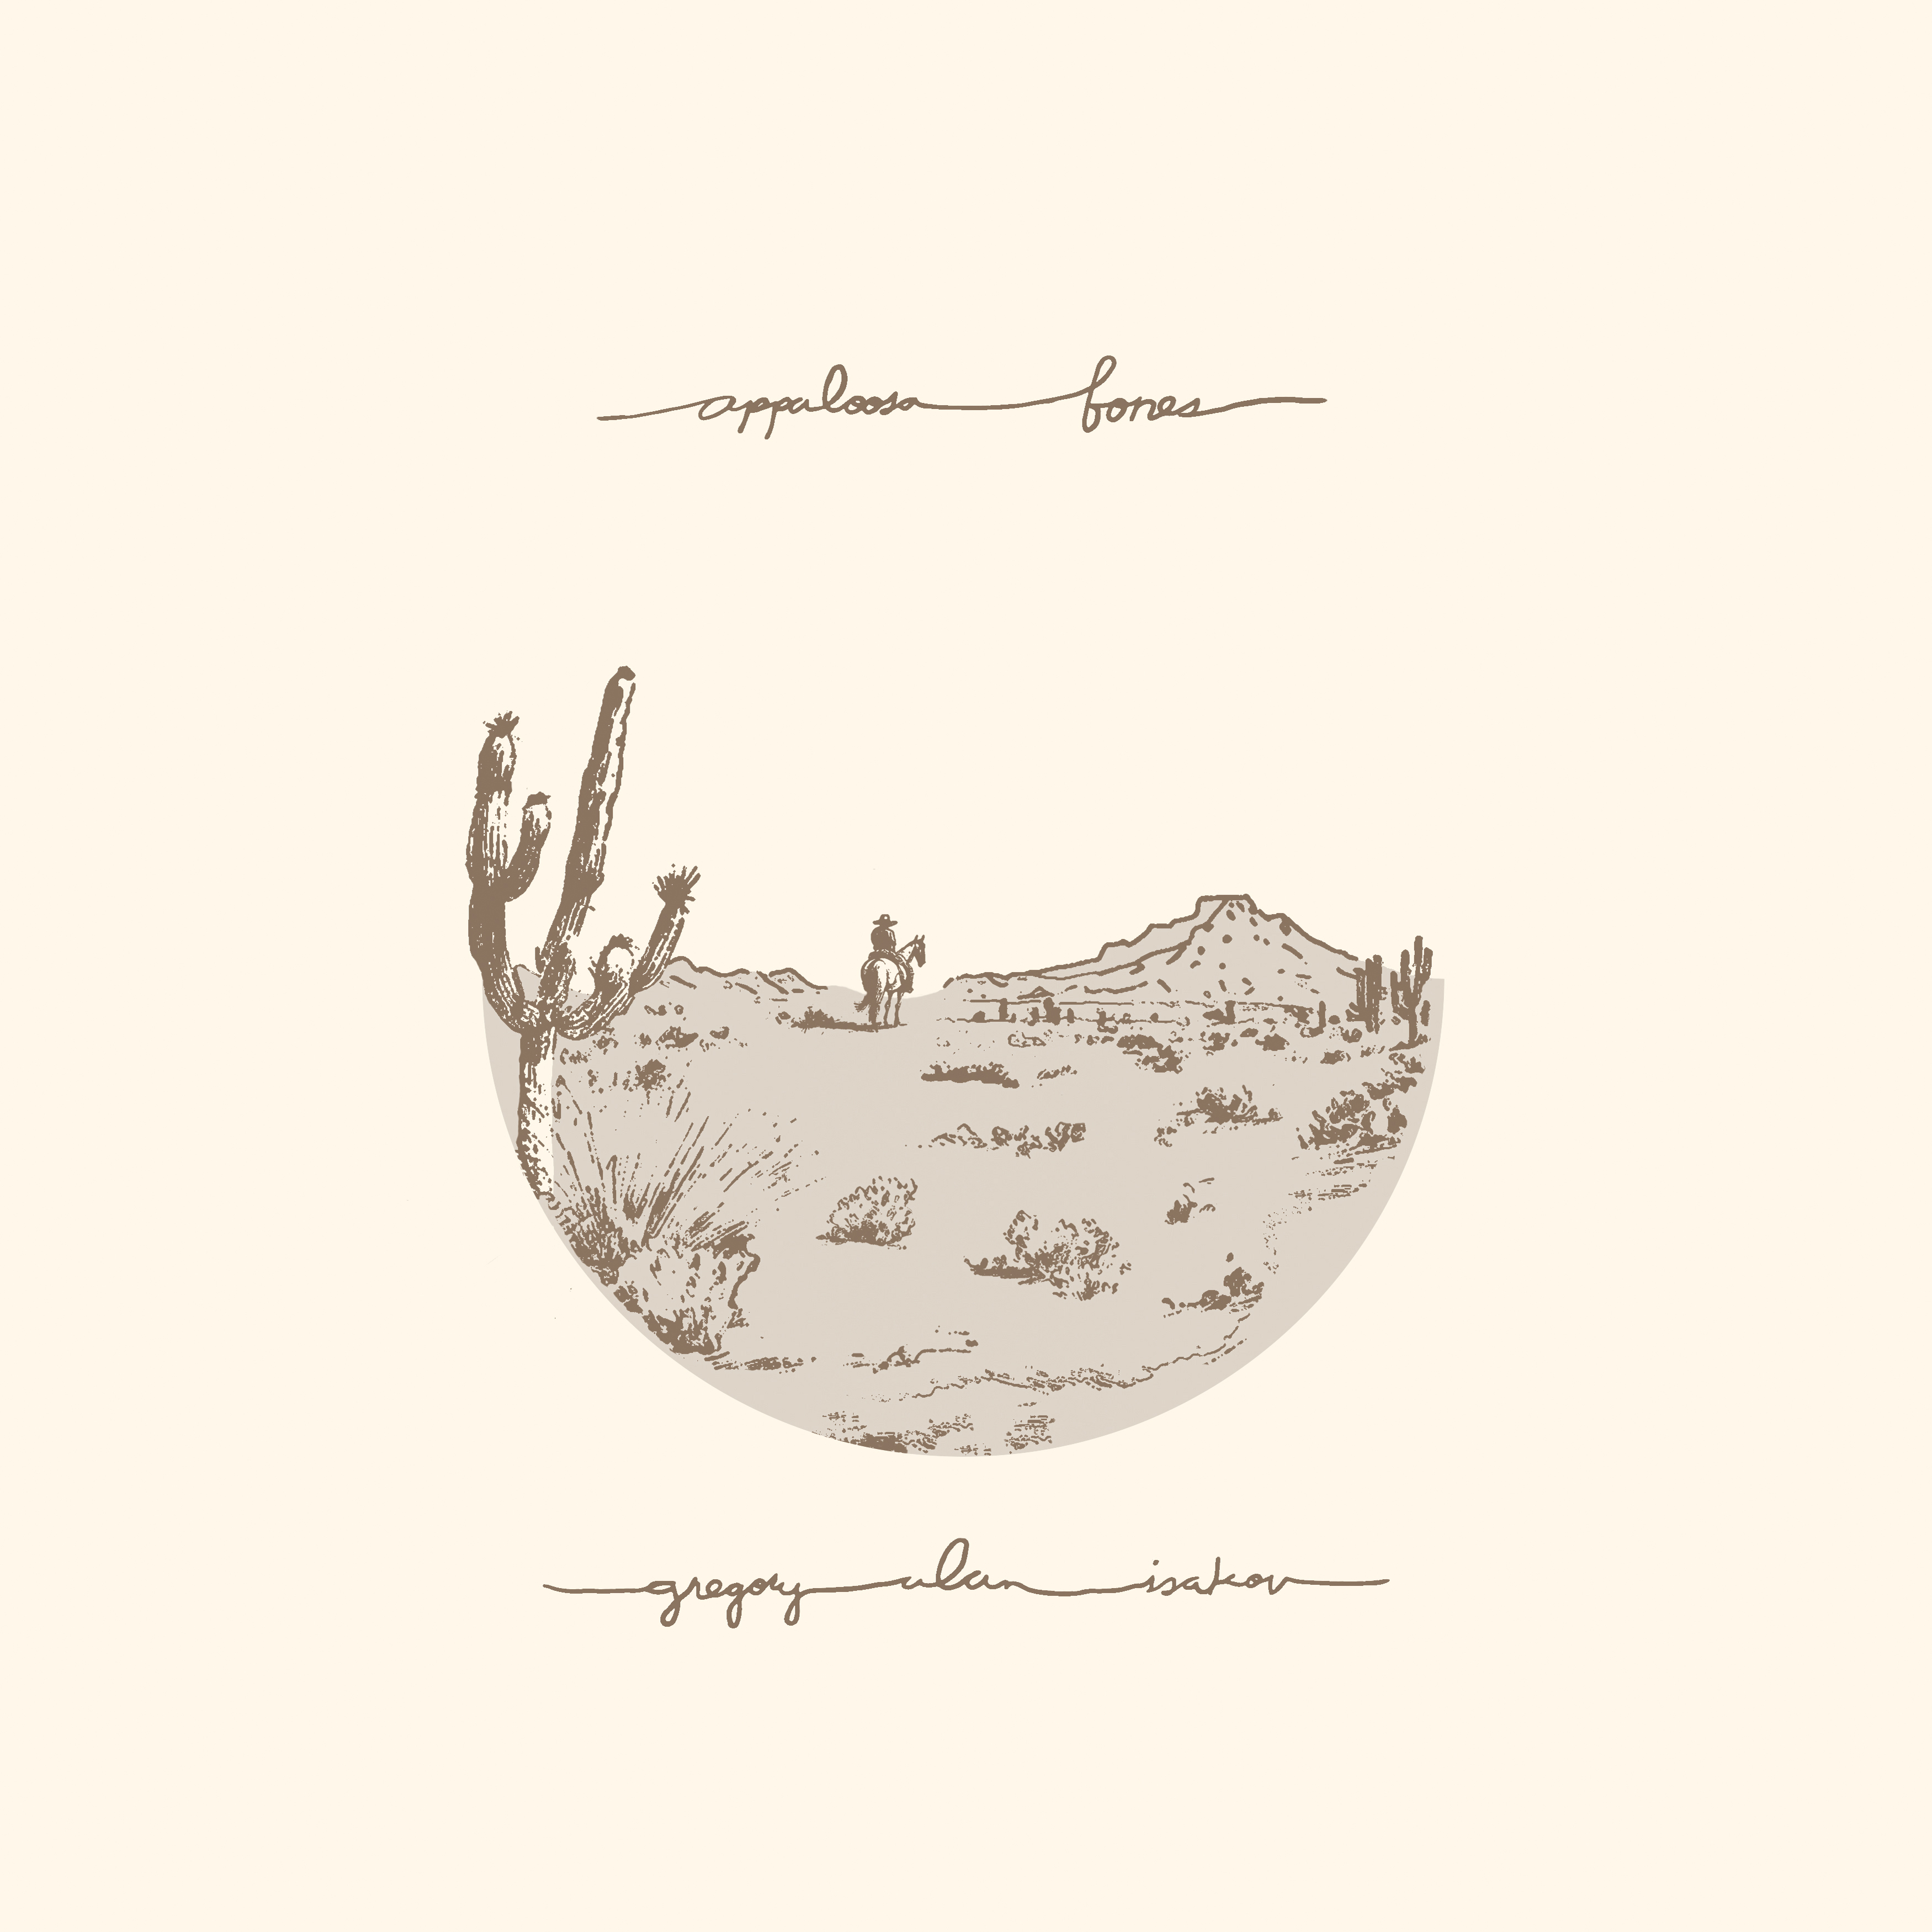 GREGORY ALAN ISAKOV’S ANTICIPATED NEW ALBUM APPALOOSA BONES OUT AUGUST 18 